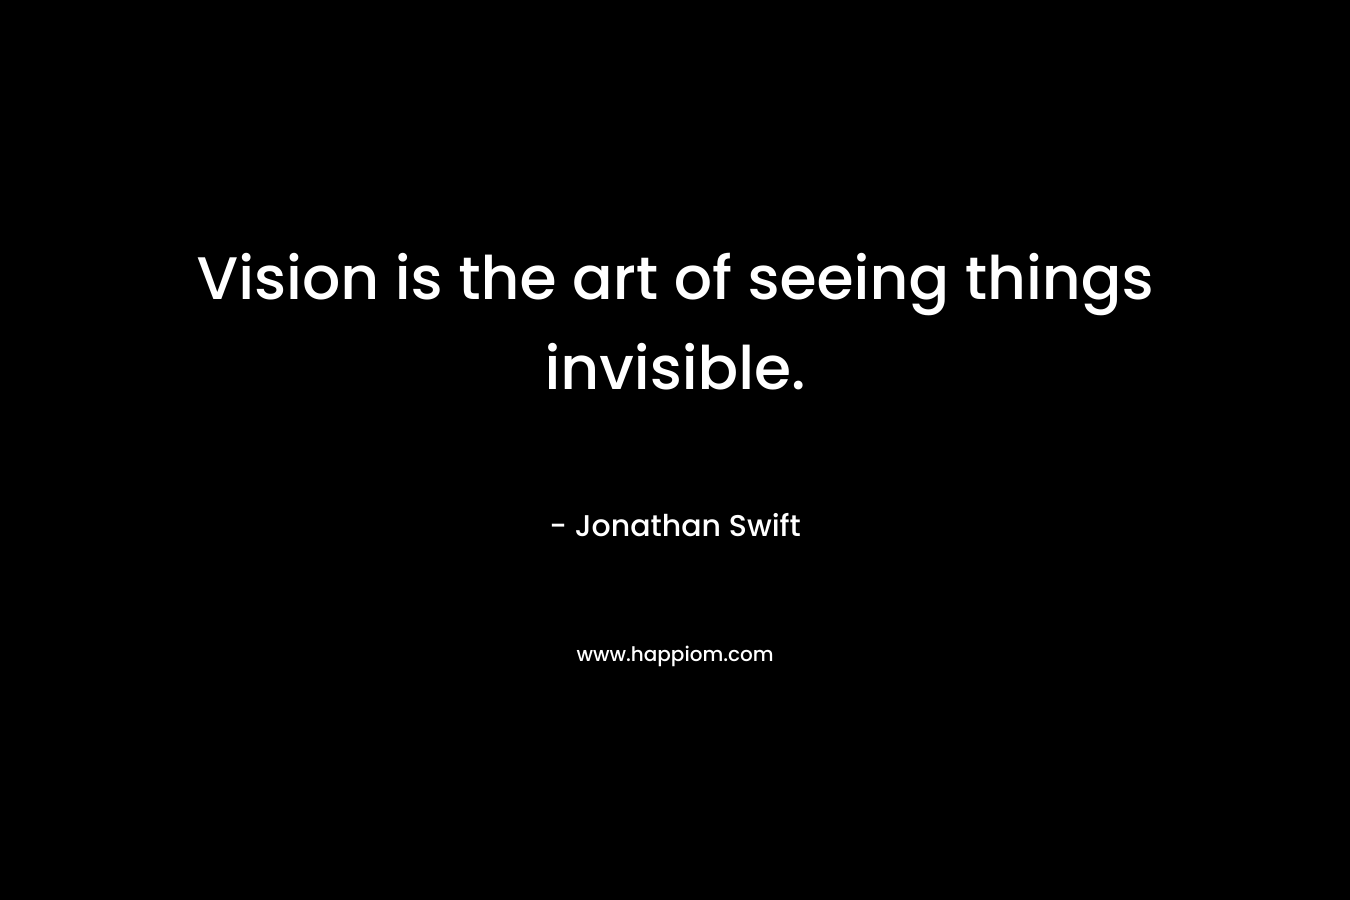 Vision is the art of seeing things invisible.